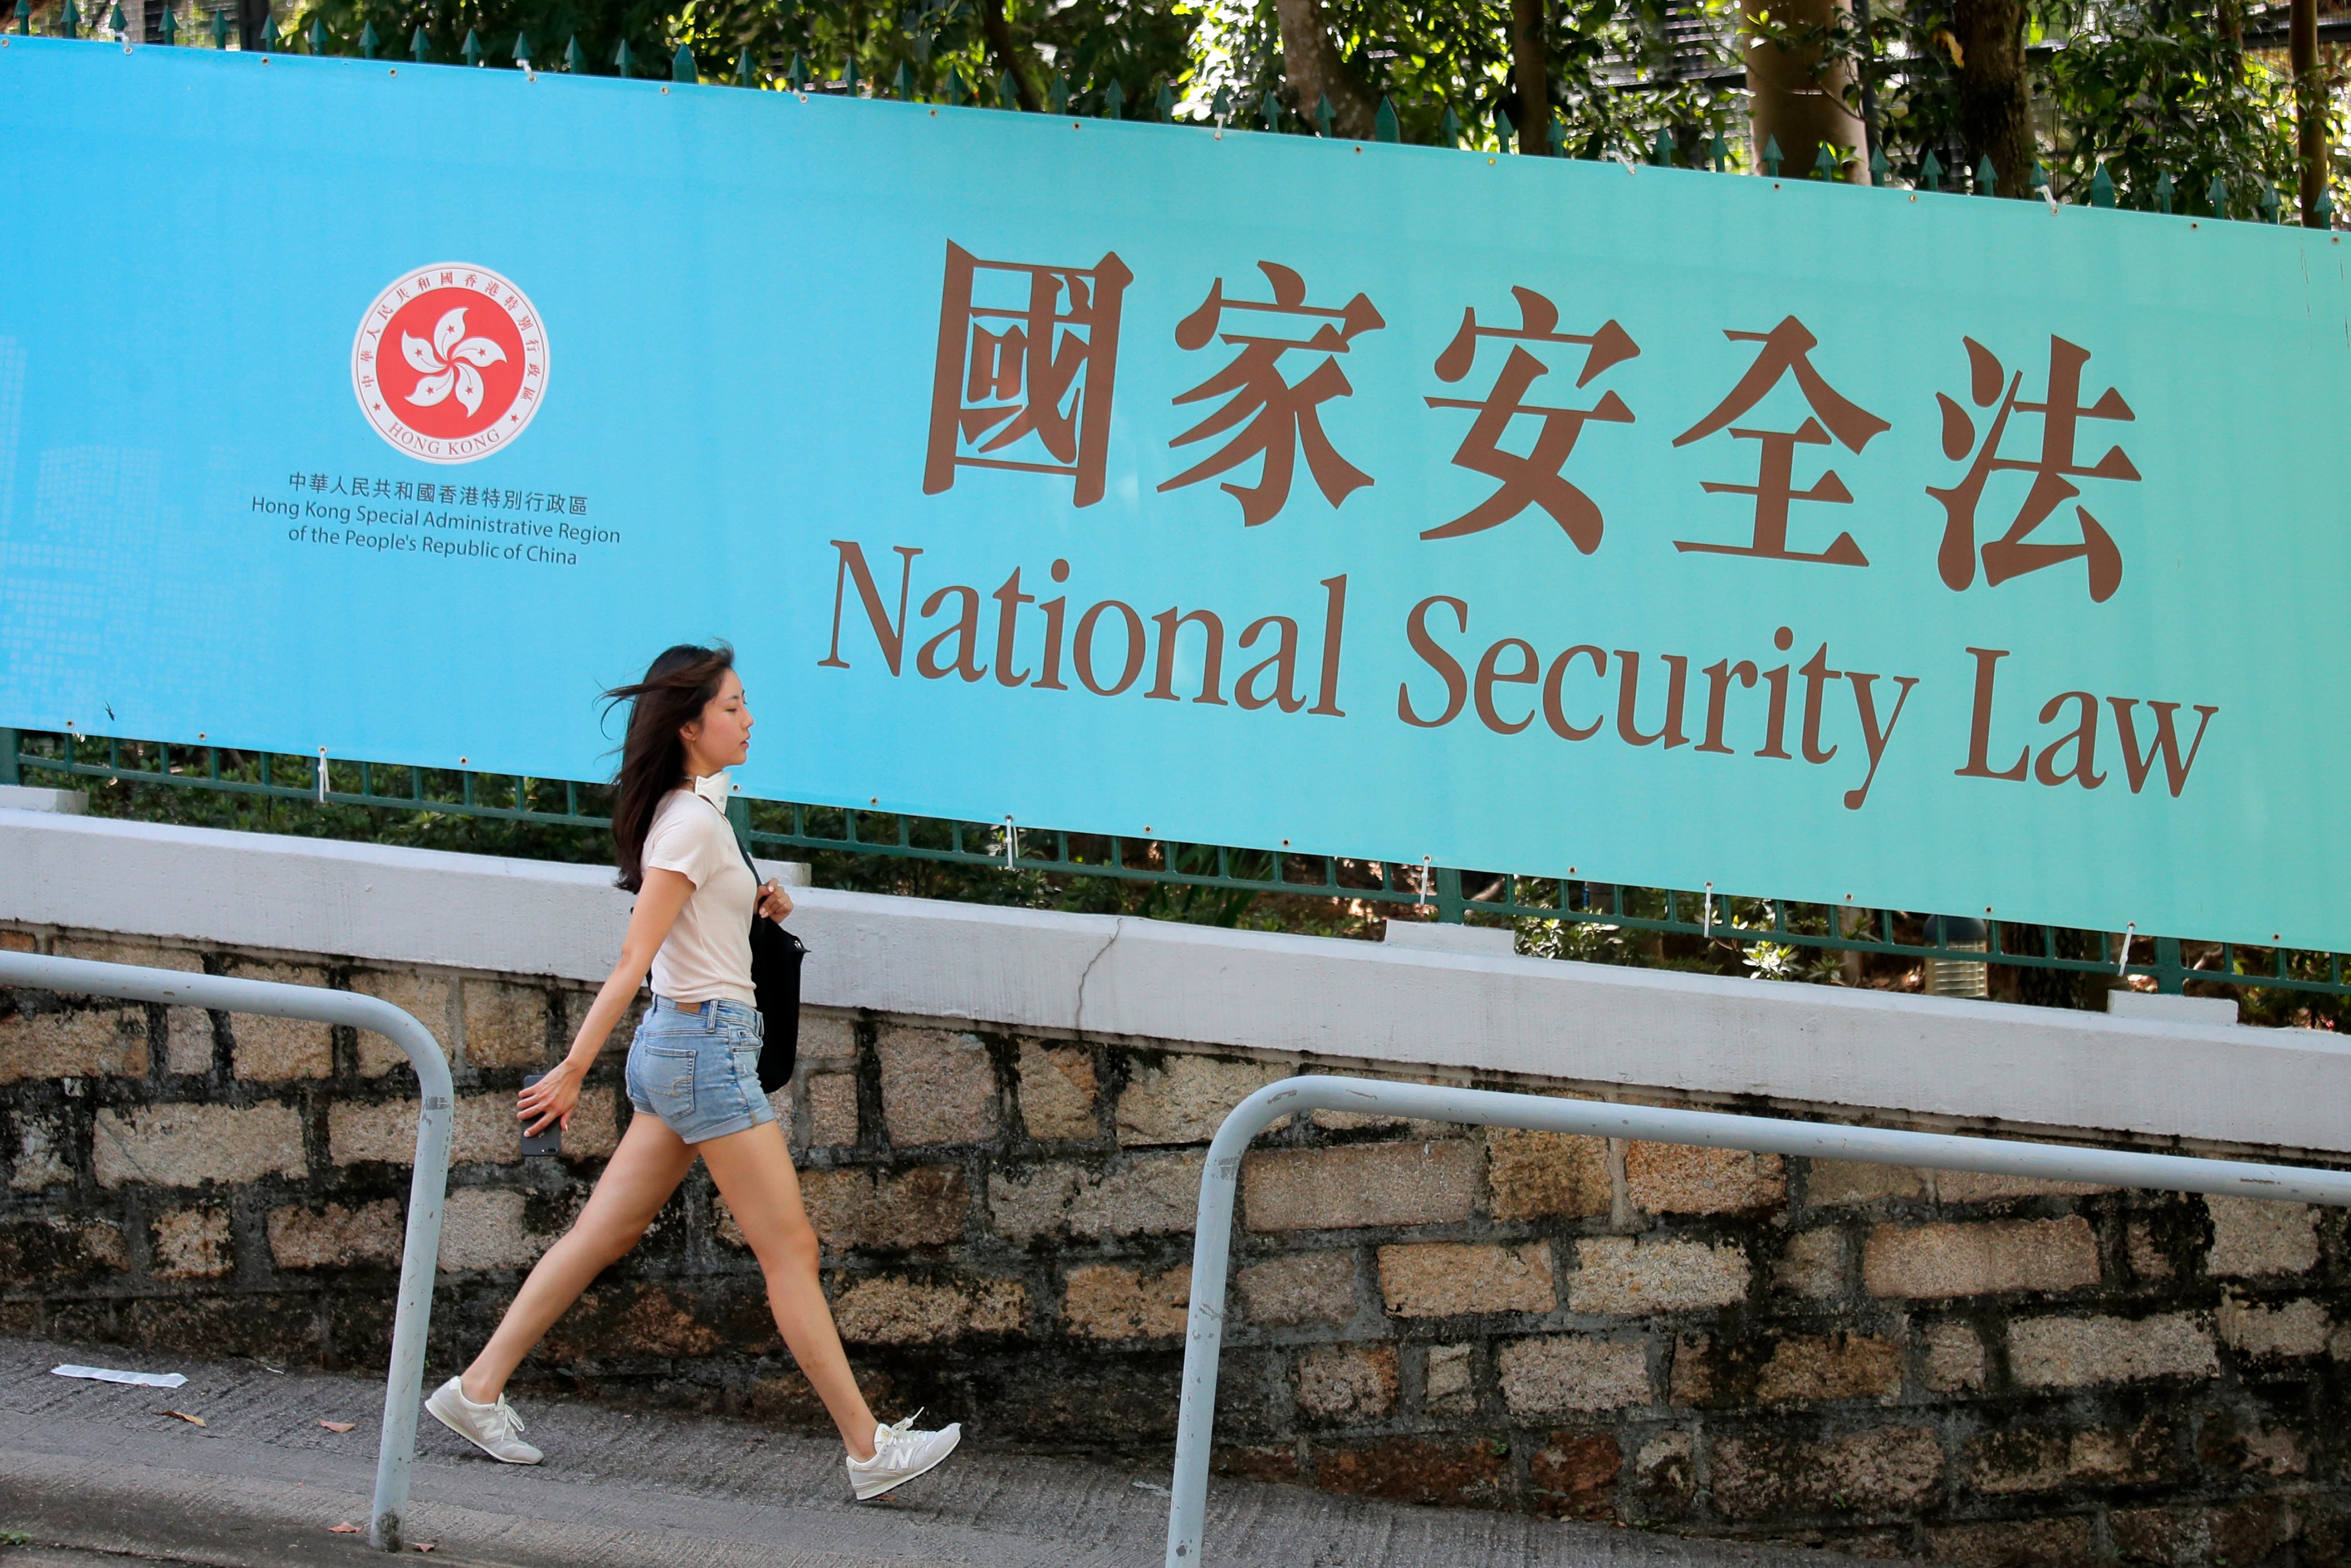 A woman walks past a banner promoting the national security law for Hong Kong in 2020. Three years after the law was imposed, uncertainty lingers over the impending Article 23 legislation. Photo: AP 